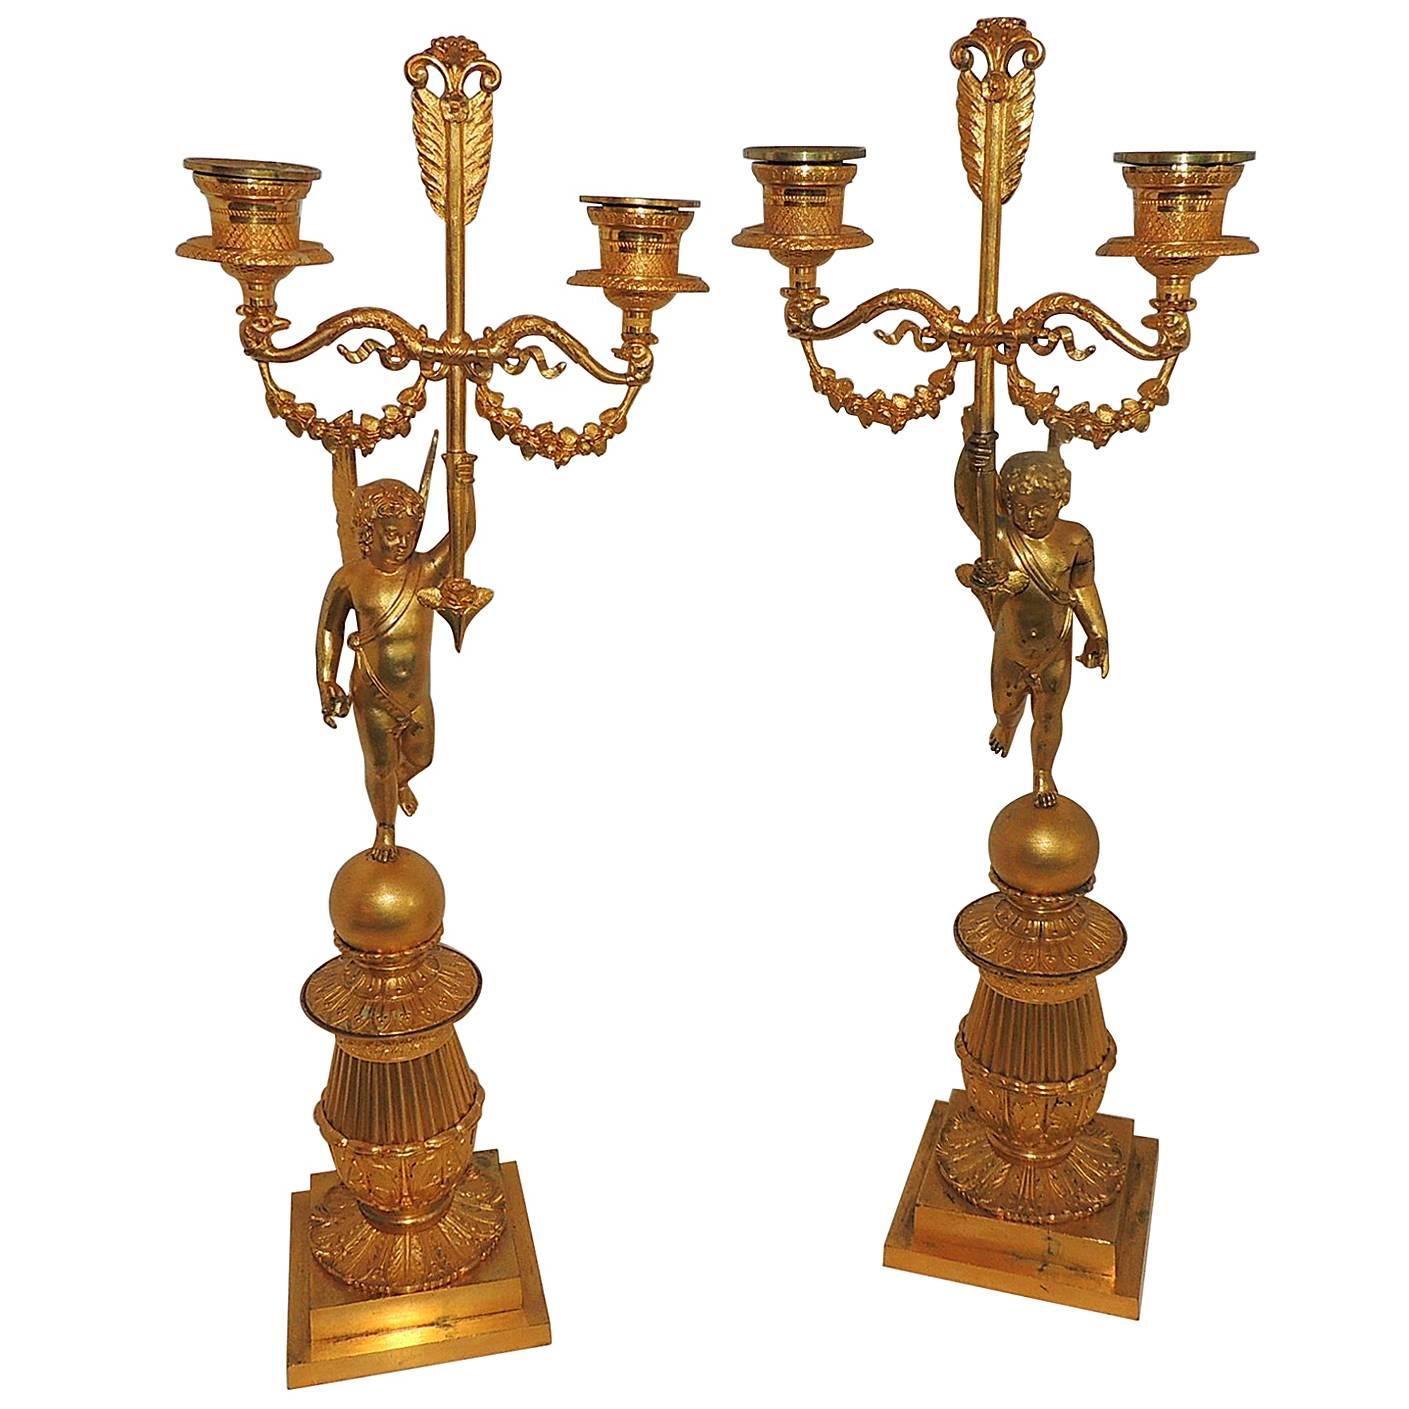 Wonderful Pair Dore Bronze Two-Arm Winged Putti Cherub Neoclassical Candelabras For Sale